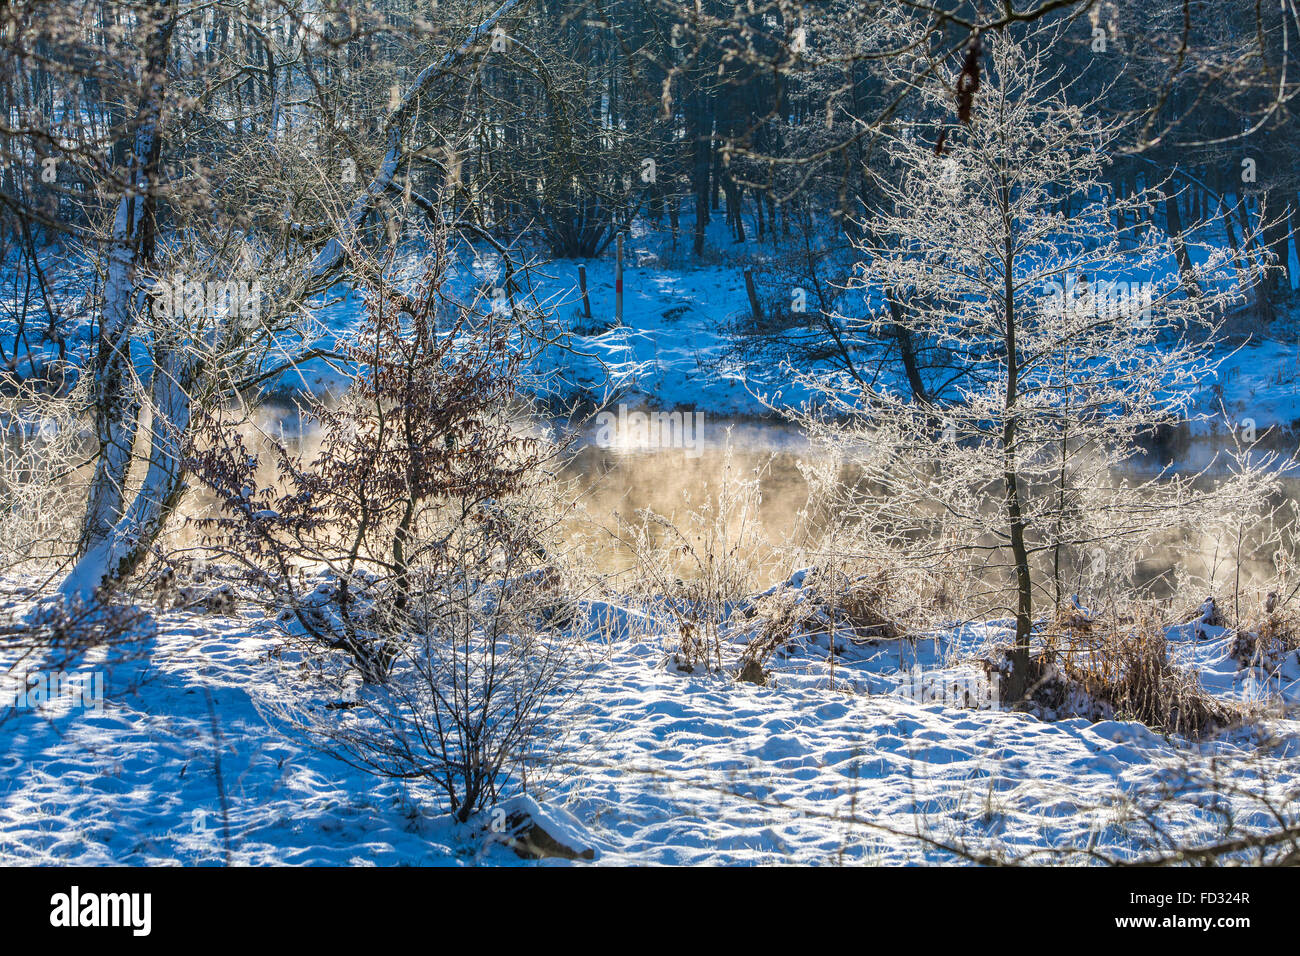 Nature in winter, covered with snow and ice, trees, plants, branches, Winterberg, Germany Stock Photo